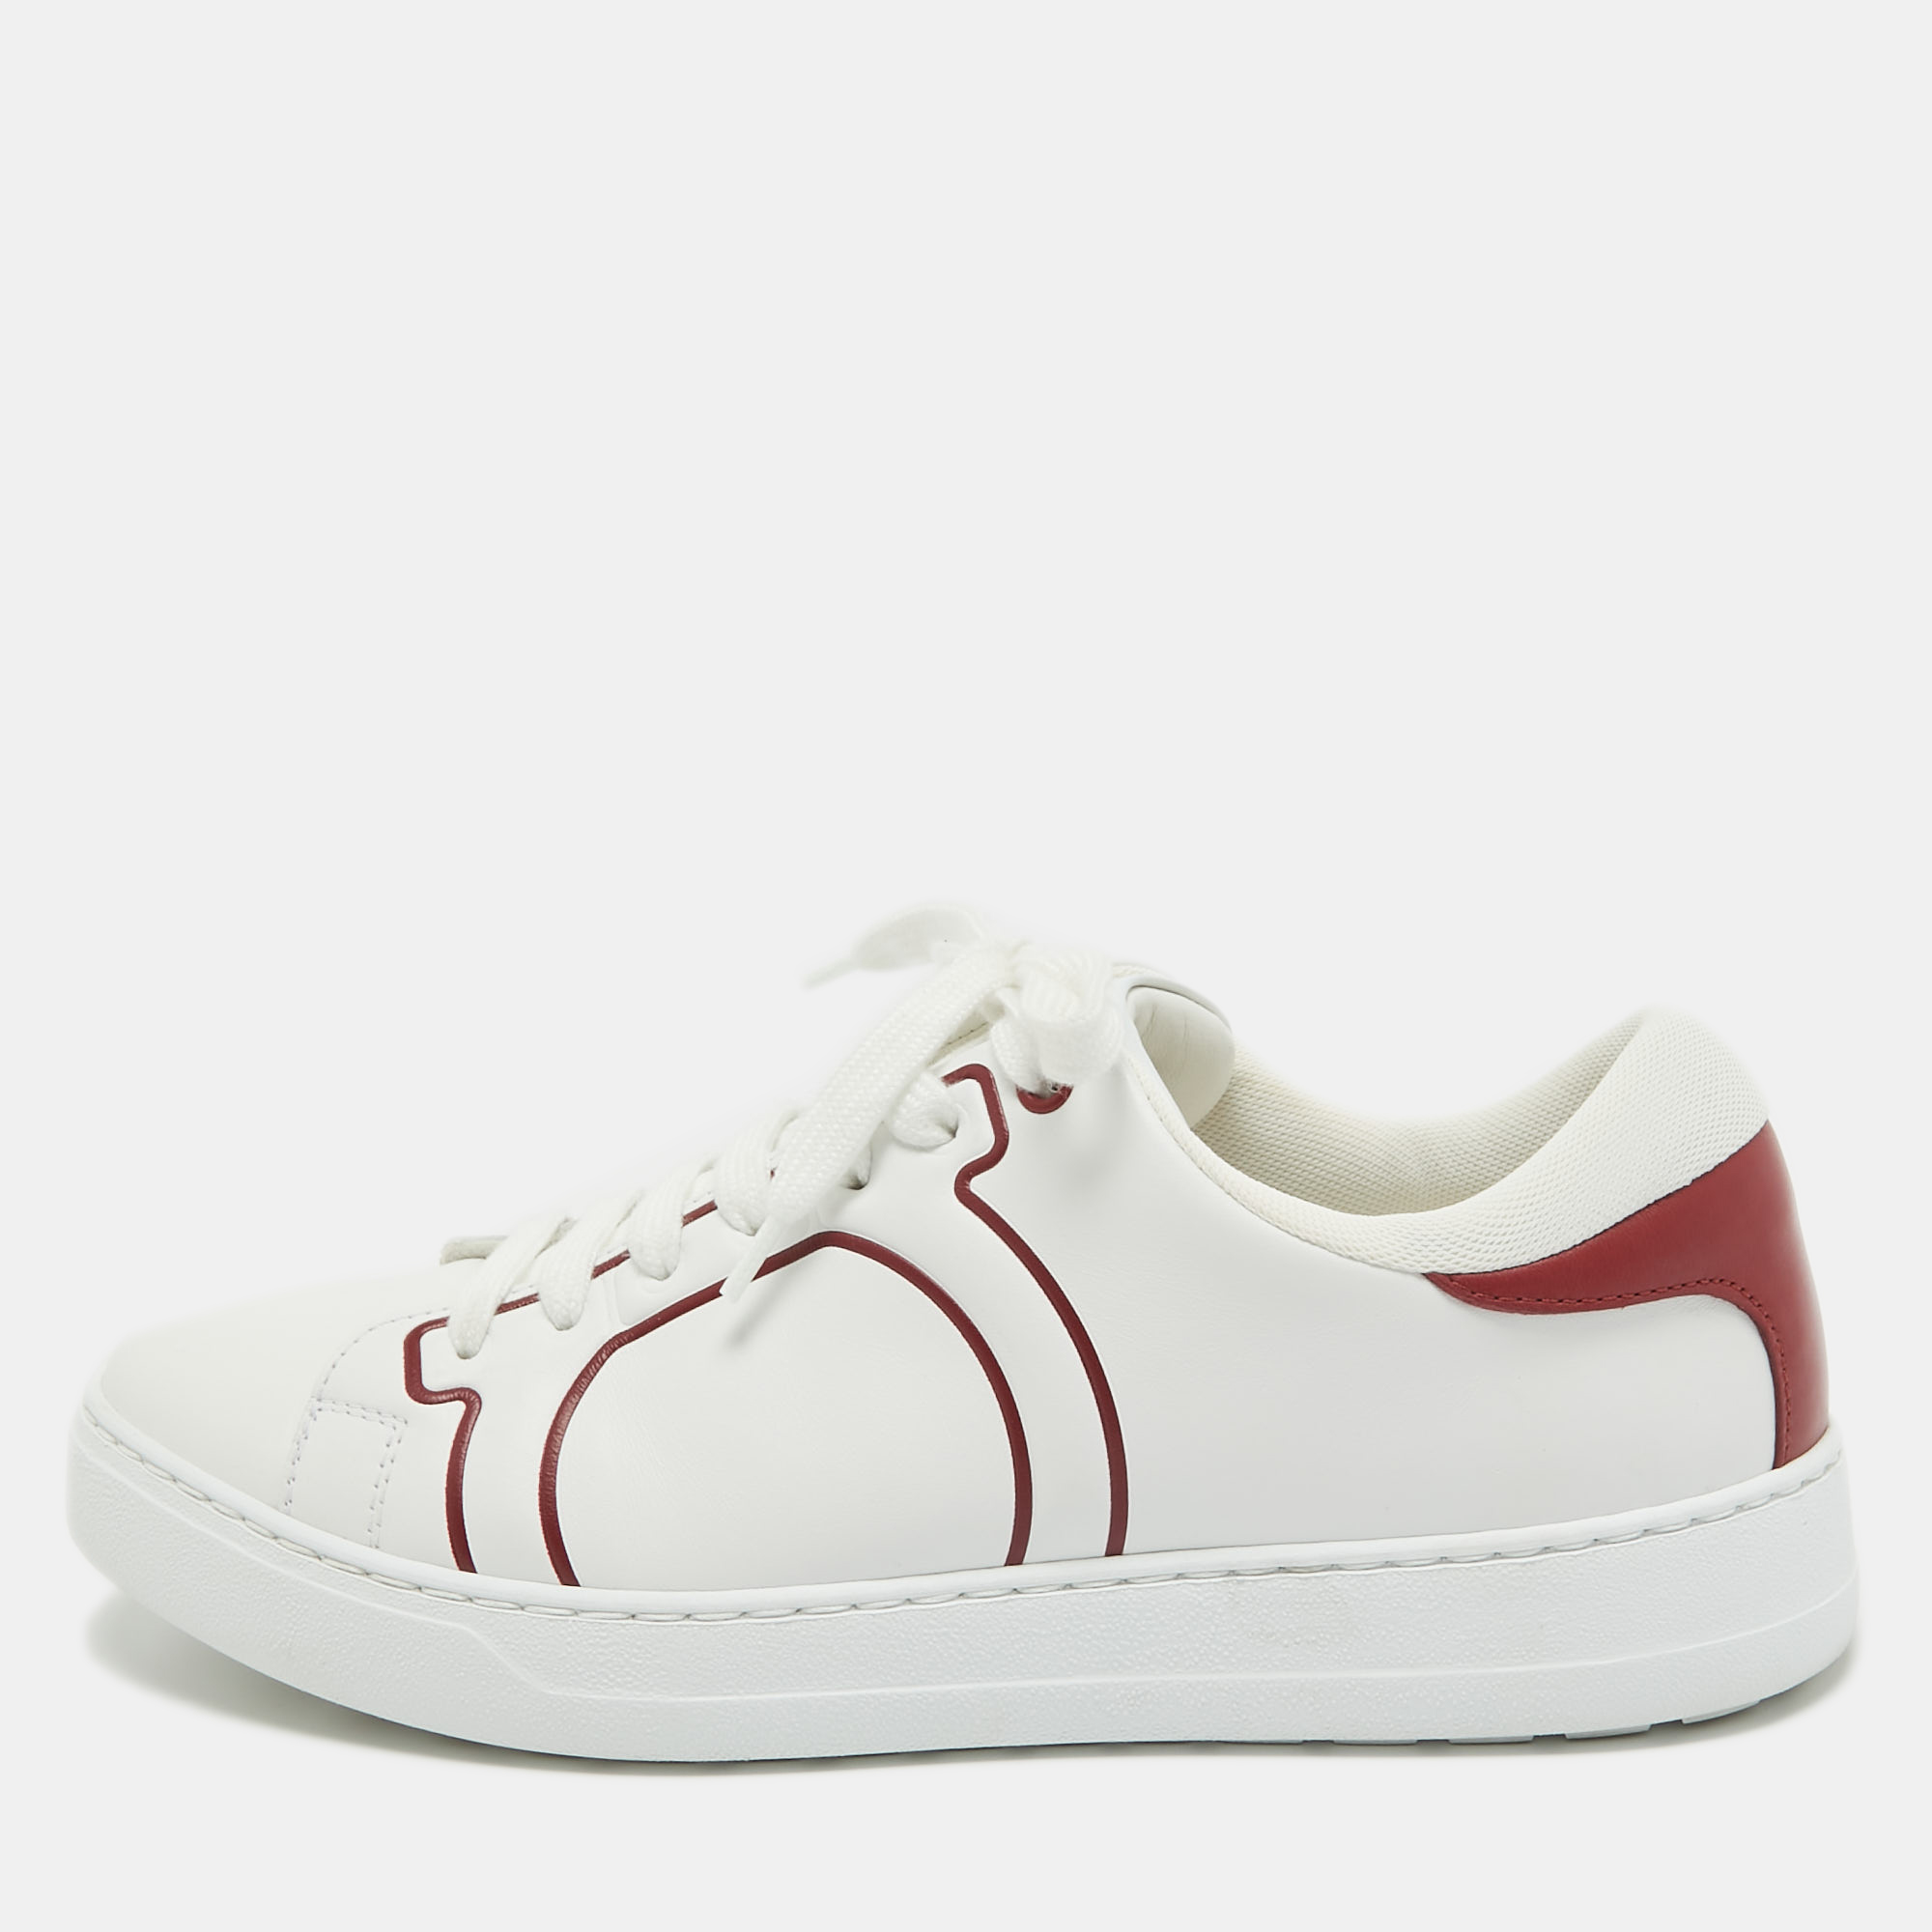 

Ferragamo White/Red Leather Classic Tennis Low Top Sneakers Size 36.5